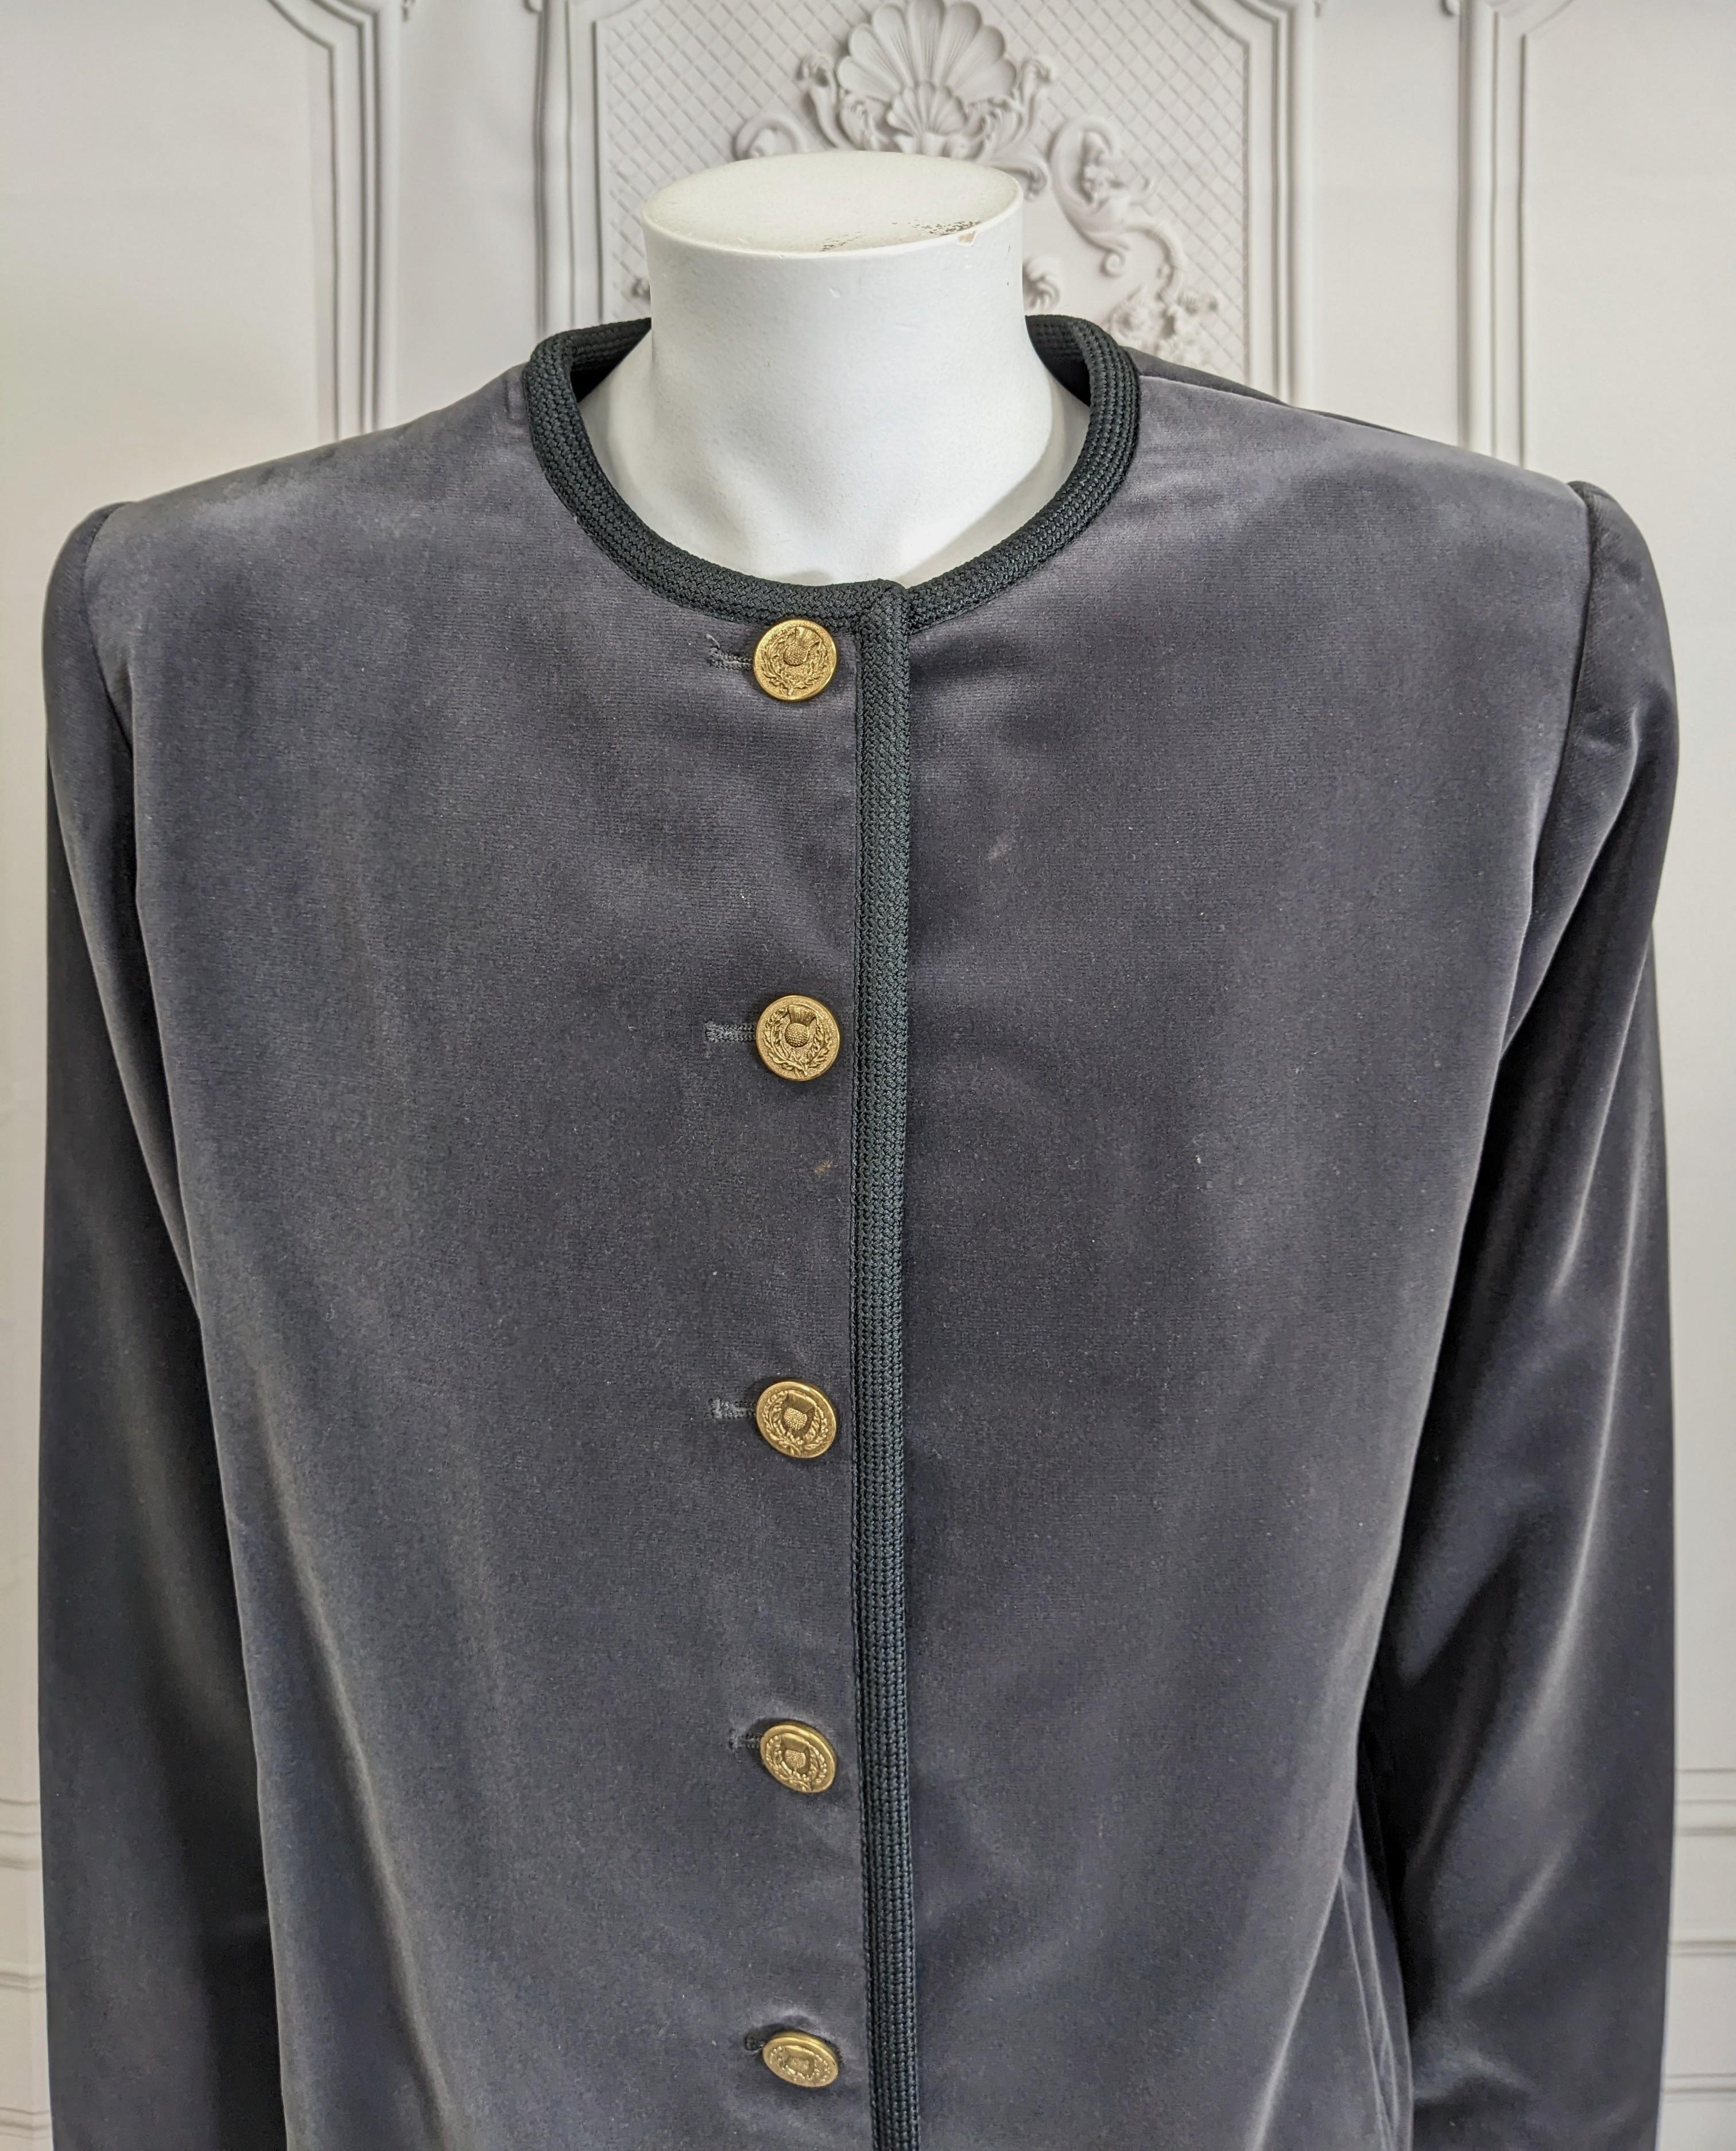 Yves Saint Laurent Gray Velvet Jacket In Excellent Condition For Sale In New York, NY